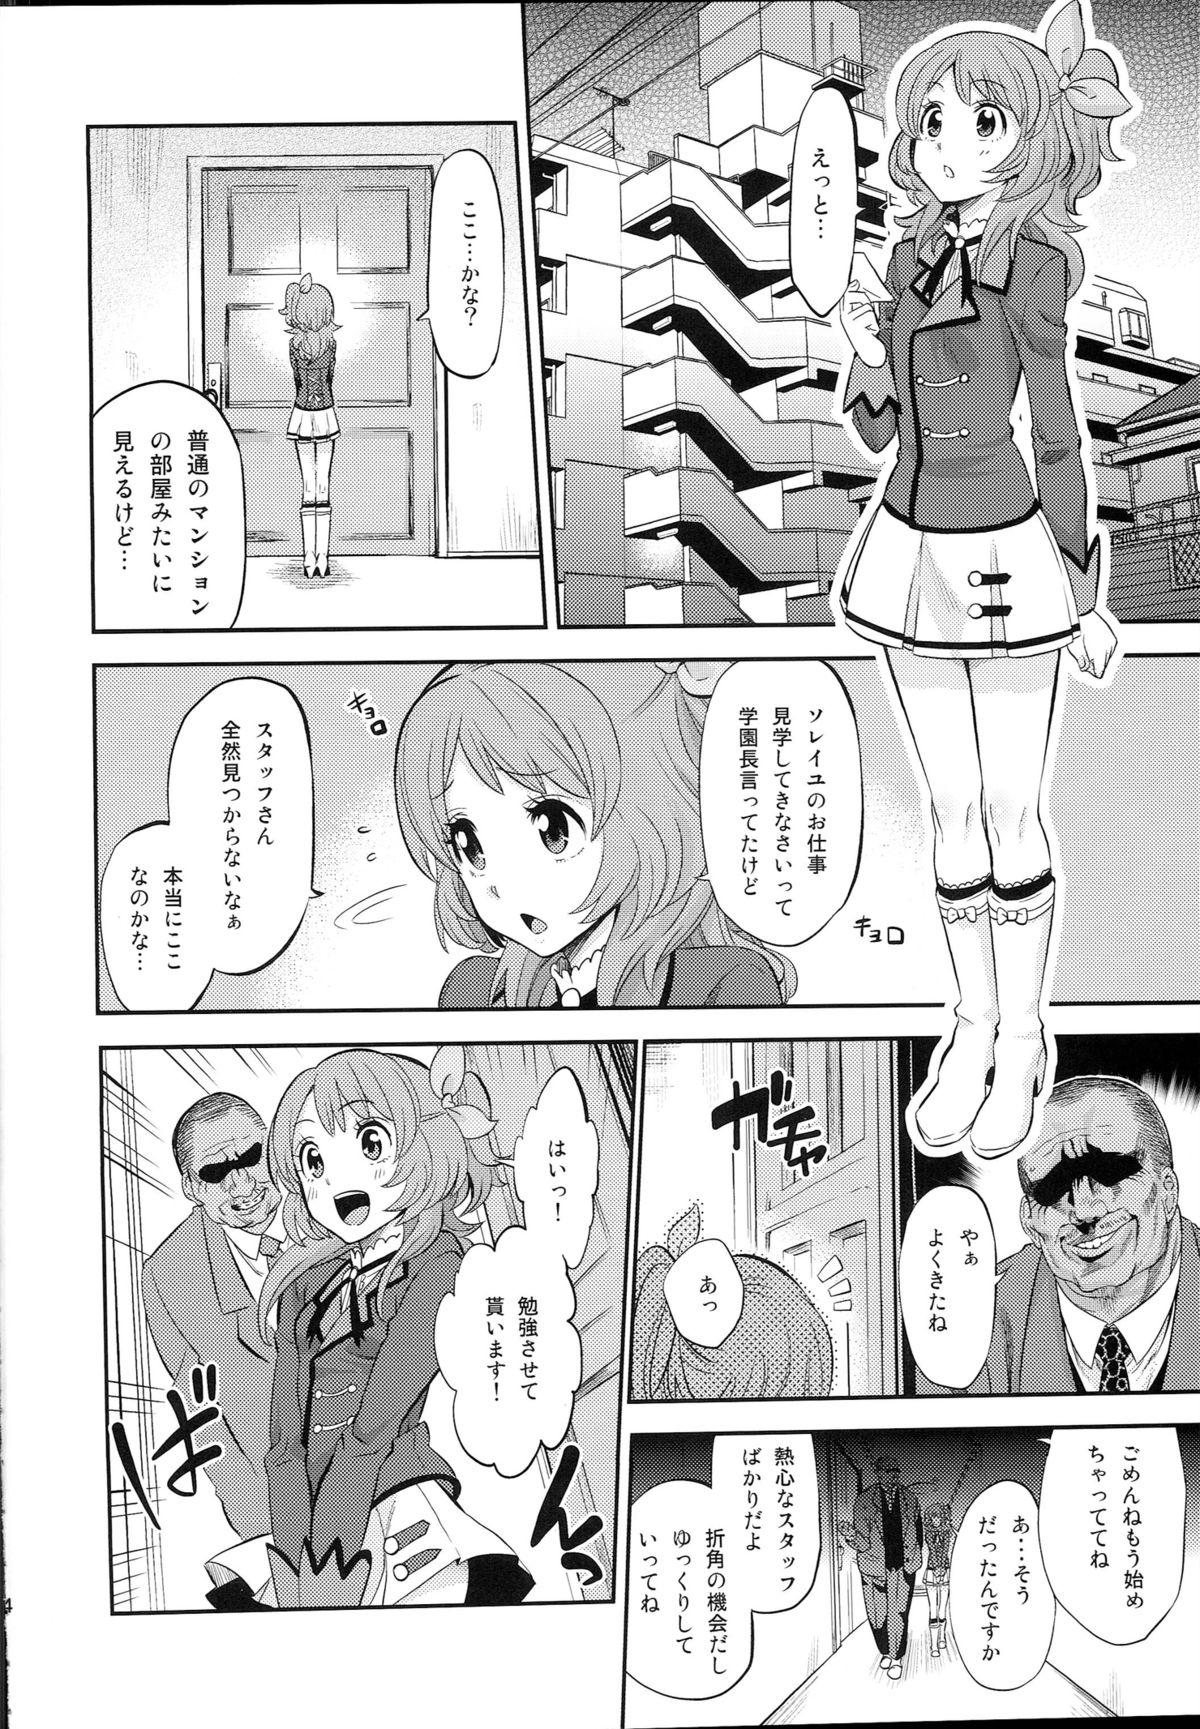 Putas IT WAS A good EXPERiENCE - Aikatsu Relax - Page 4